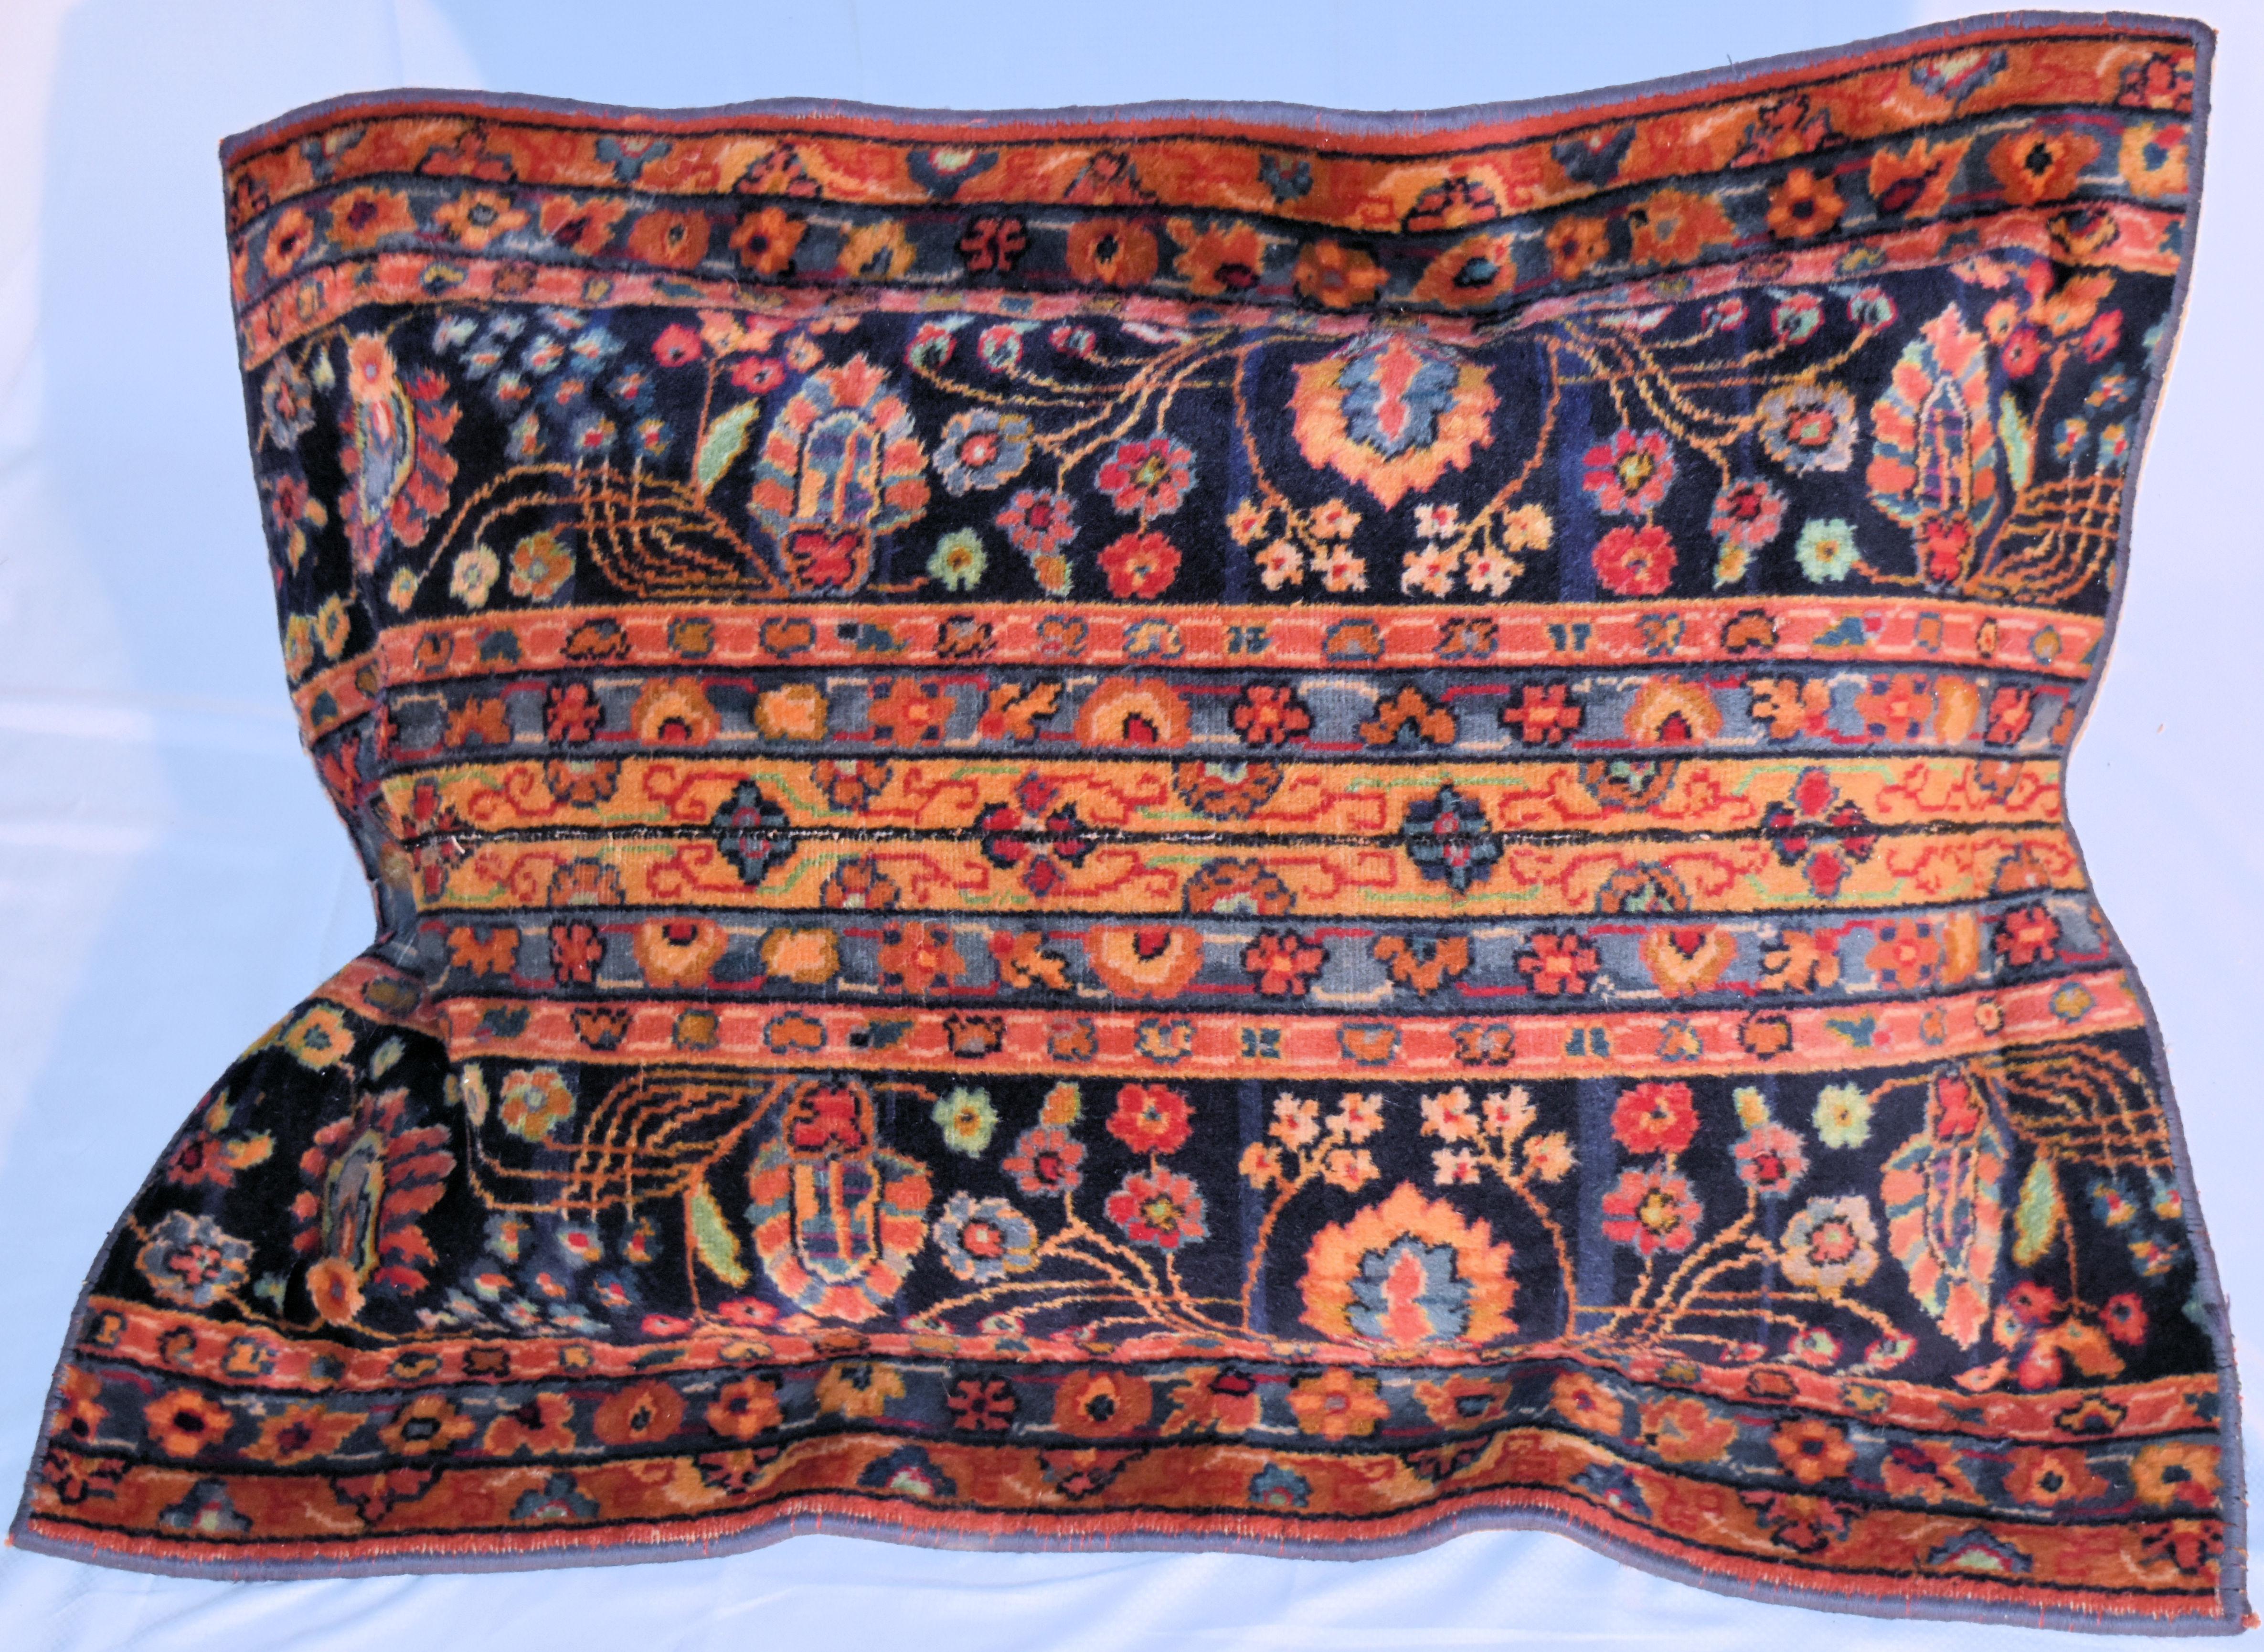 Mid-Century Modern Vintage Large Wool Rug Pillows, Mid-20th Century, Chinese Rug Fragment